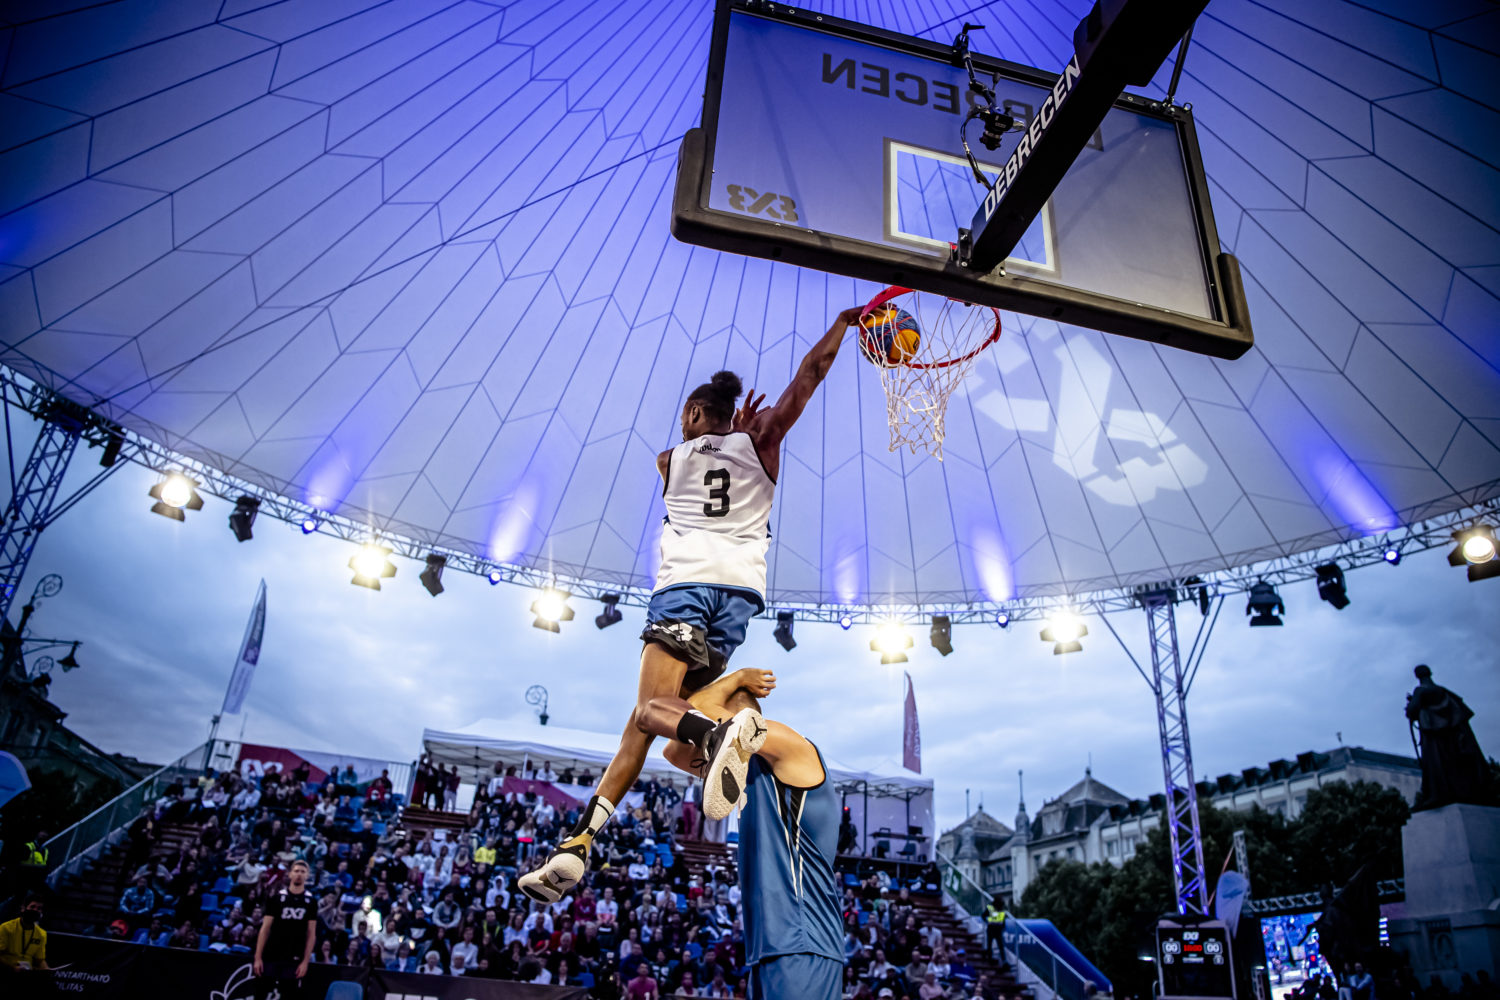 Maurice Lacroix is named Official Timekeeper of the FIBA 3x3 